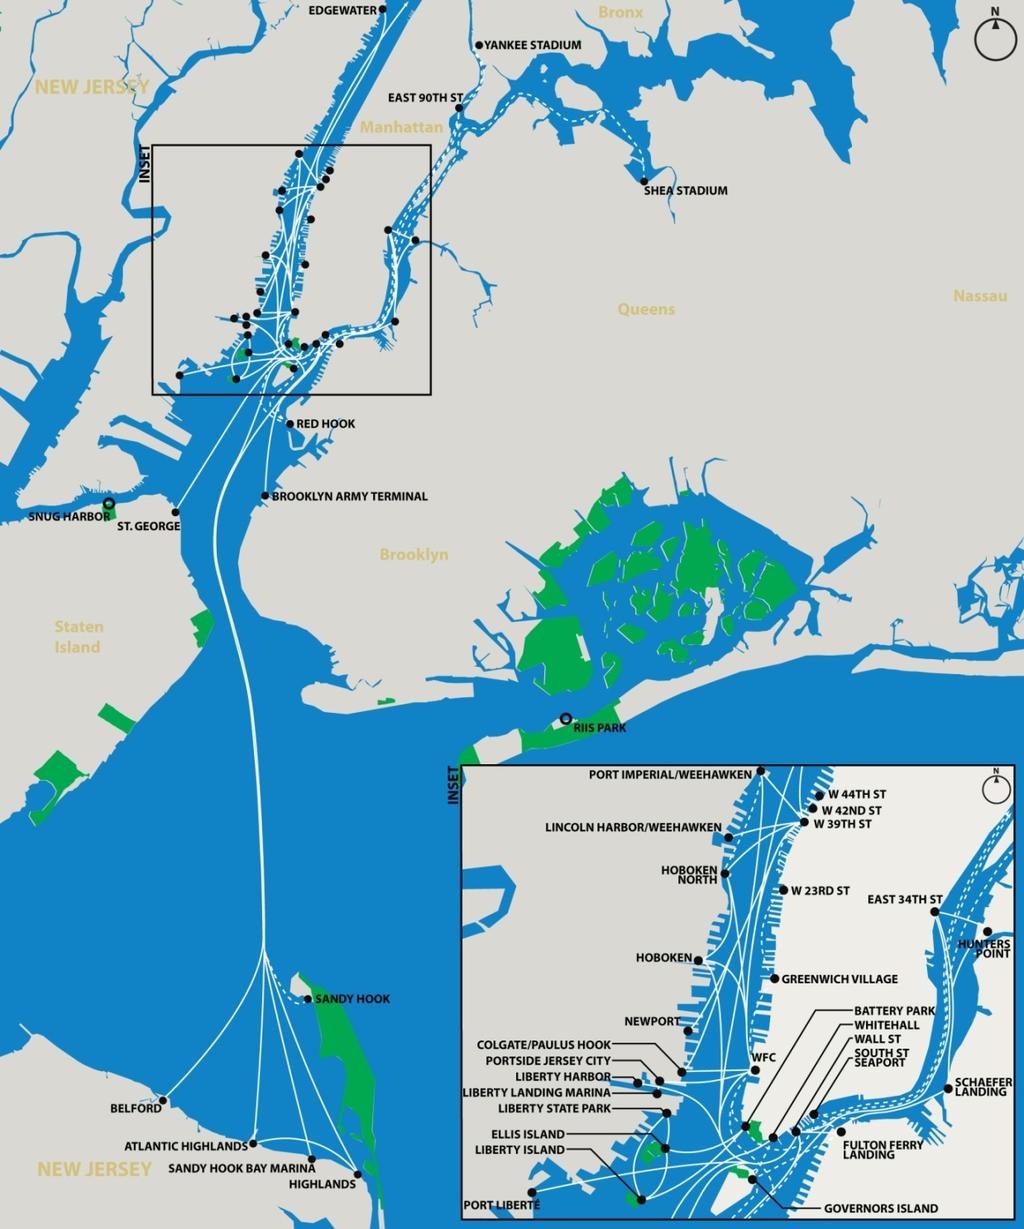 Strengthen and Expand Ferries Support capital investments by private operators Strengthen existing trans- Hudson ferries New: La